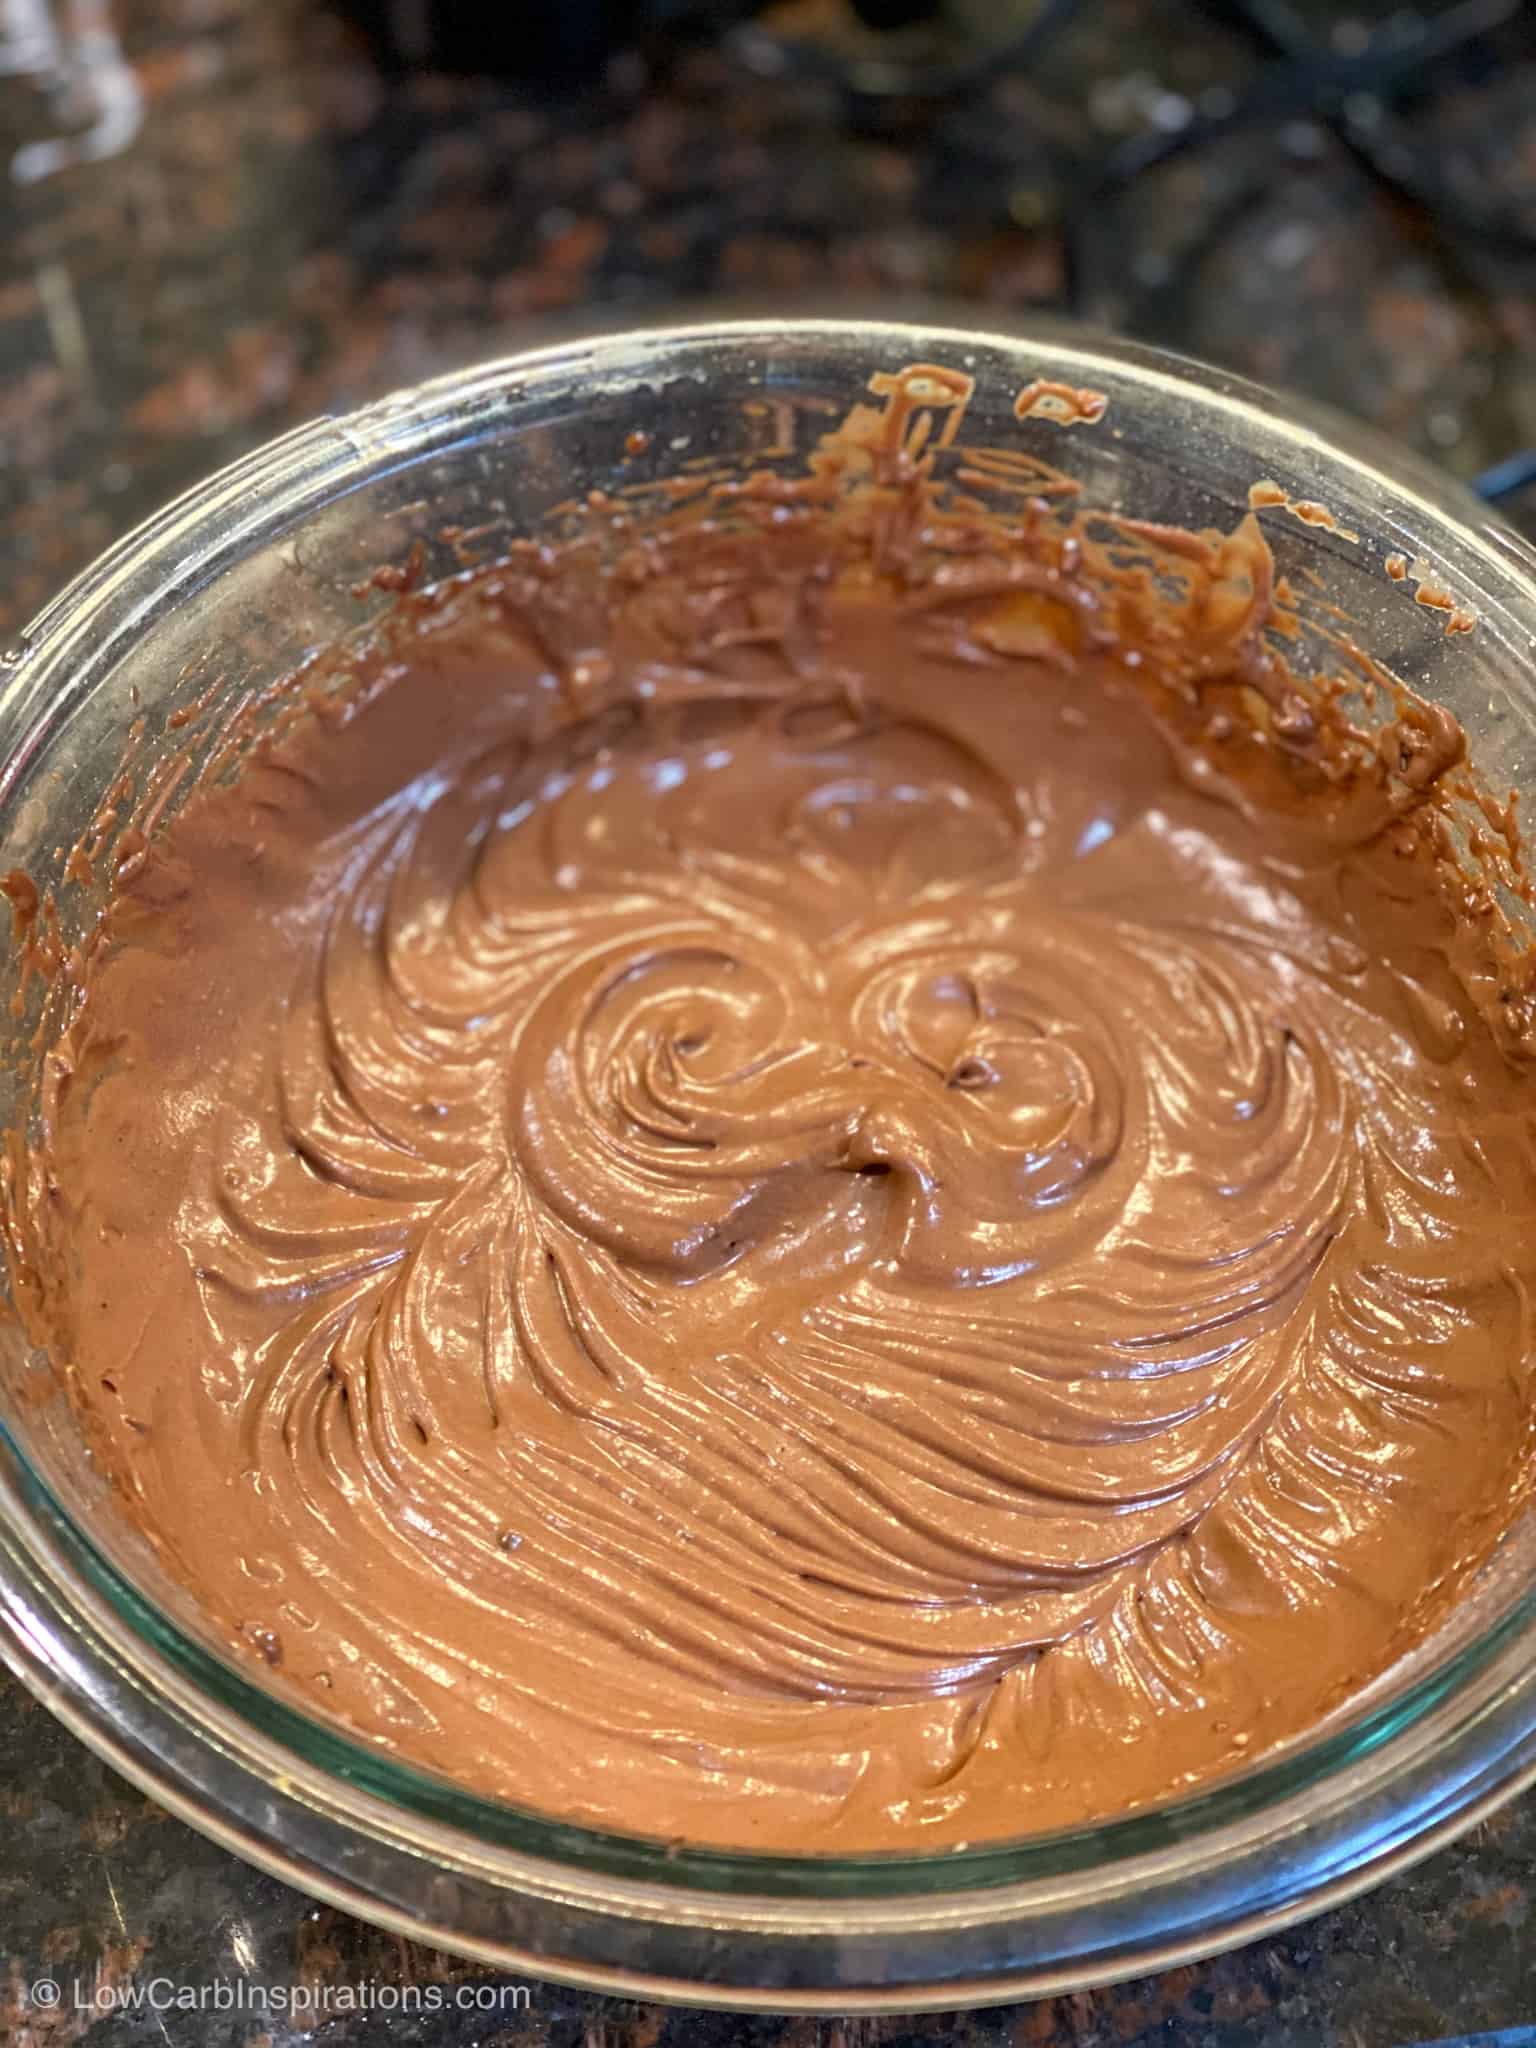 Sugar Free and Dairy Free chocolate frosting recipe